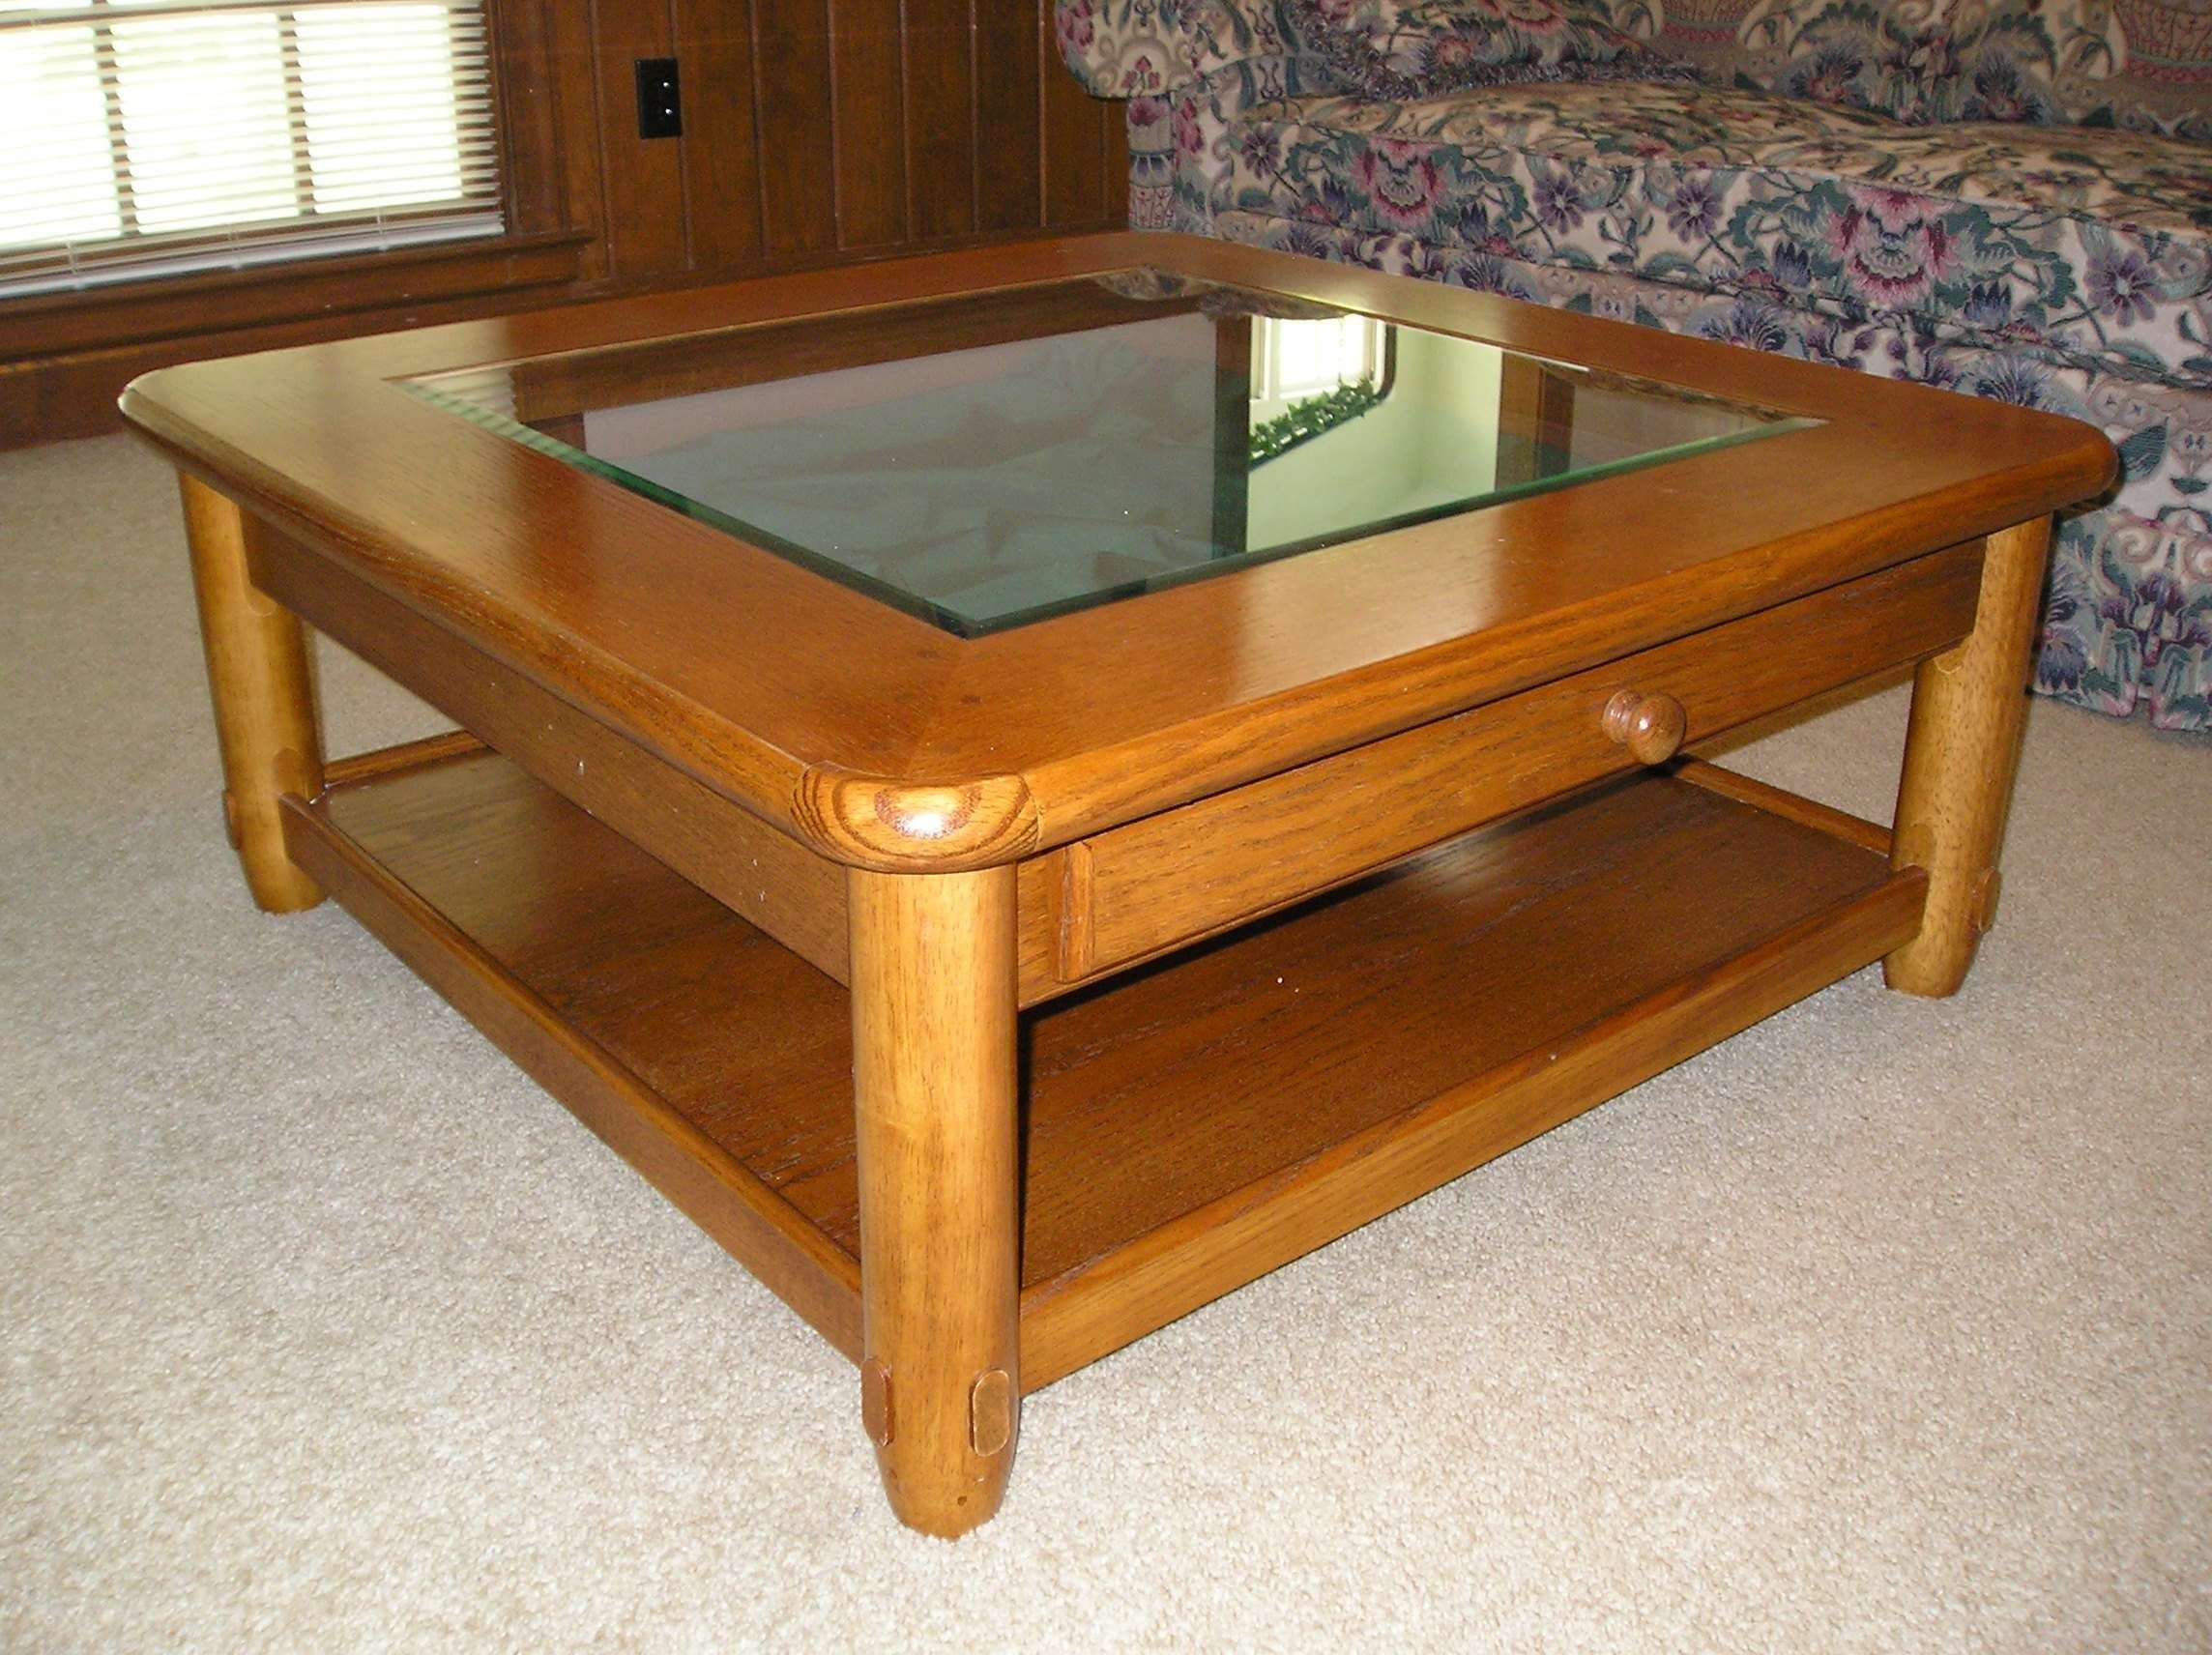 Oak Coffee Table With Glass Top – Oak Coffee Table, Clear Glass Pertaining To Popular Oak Coffee Table With Glass Top (View 1 of 20)